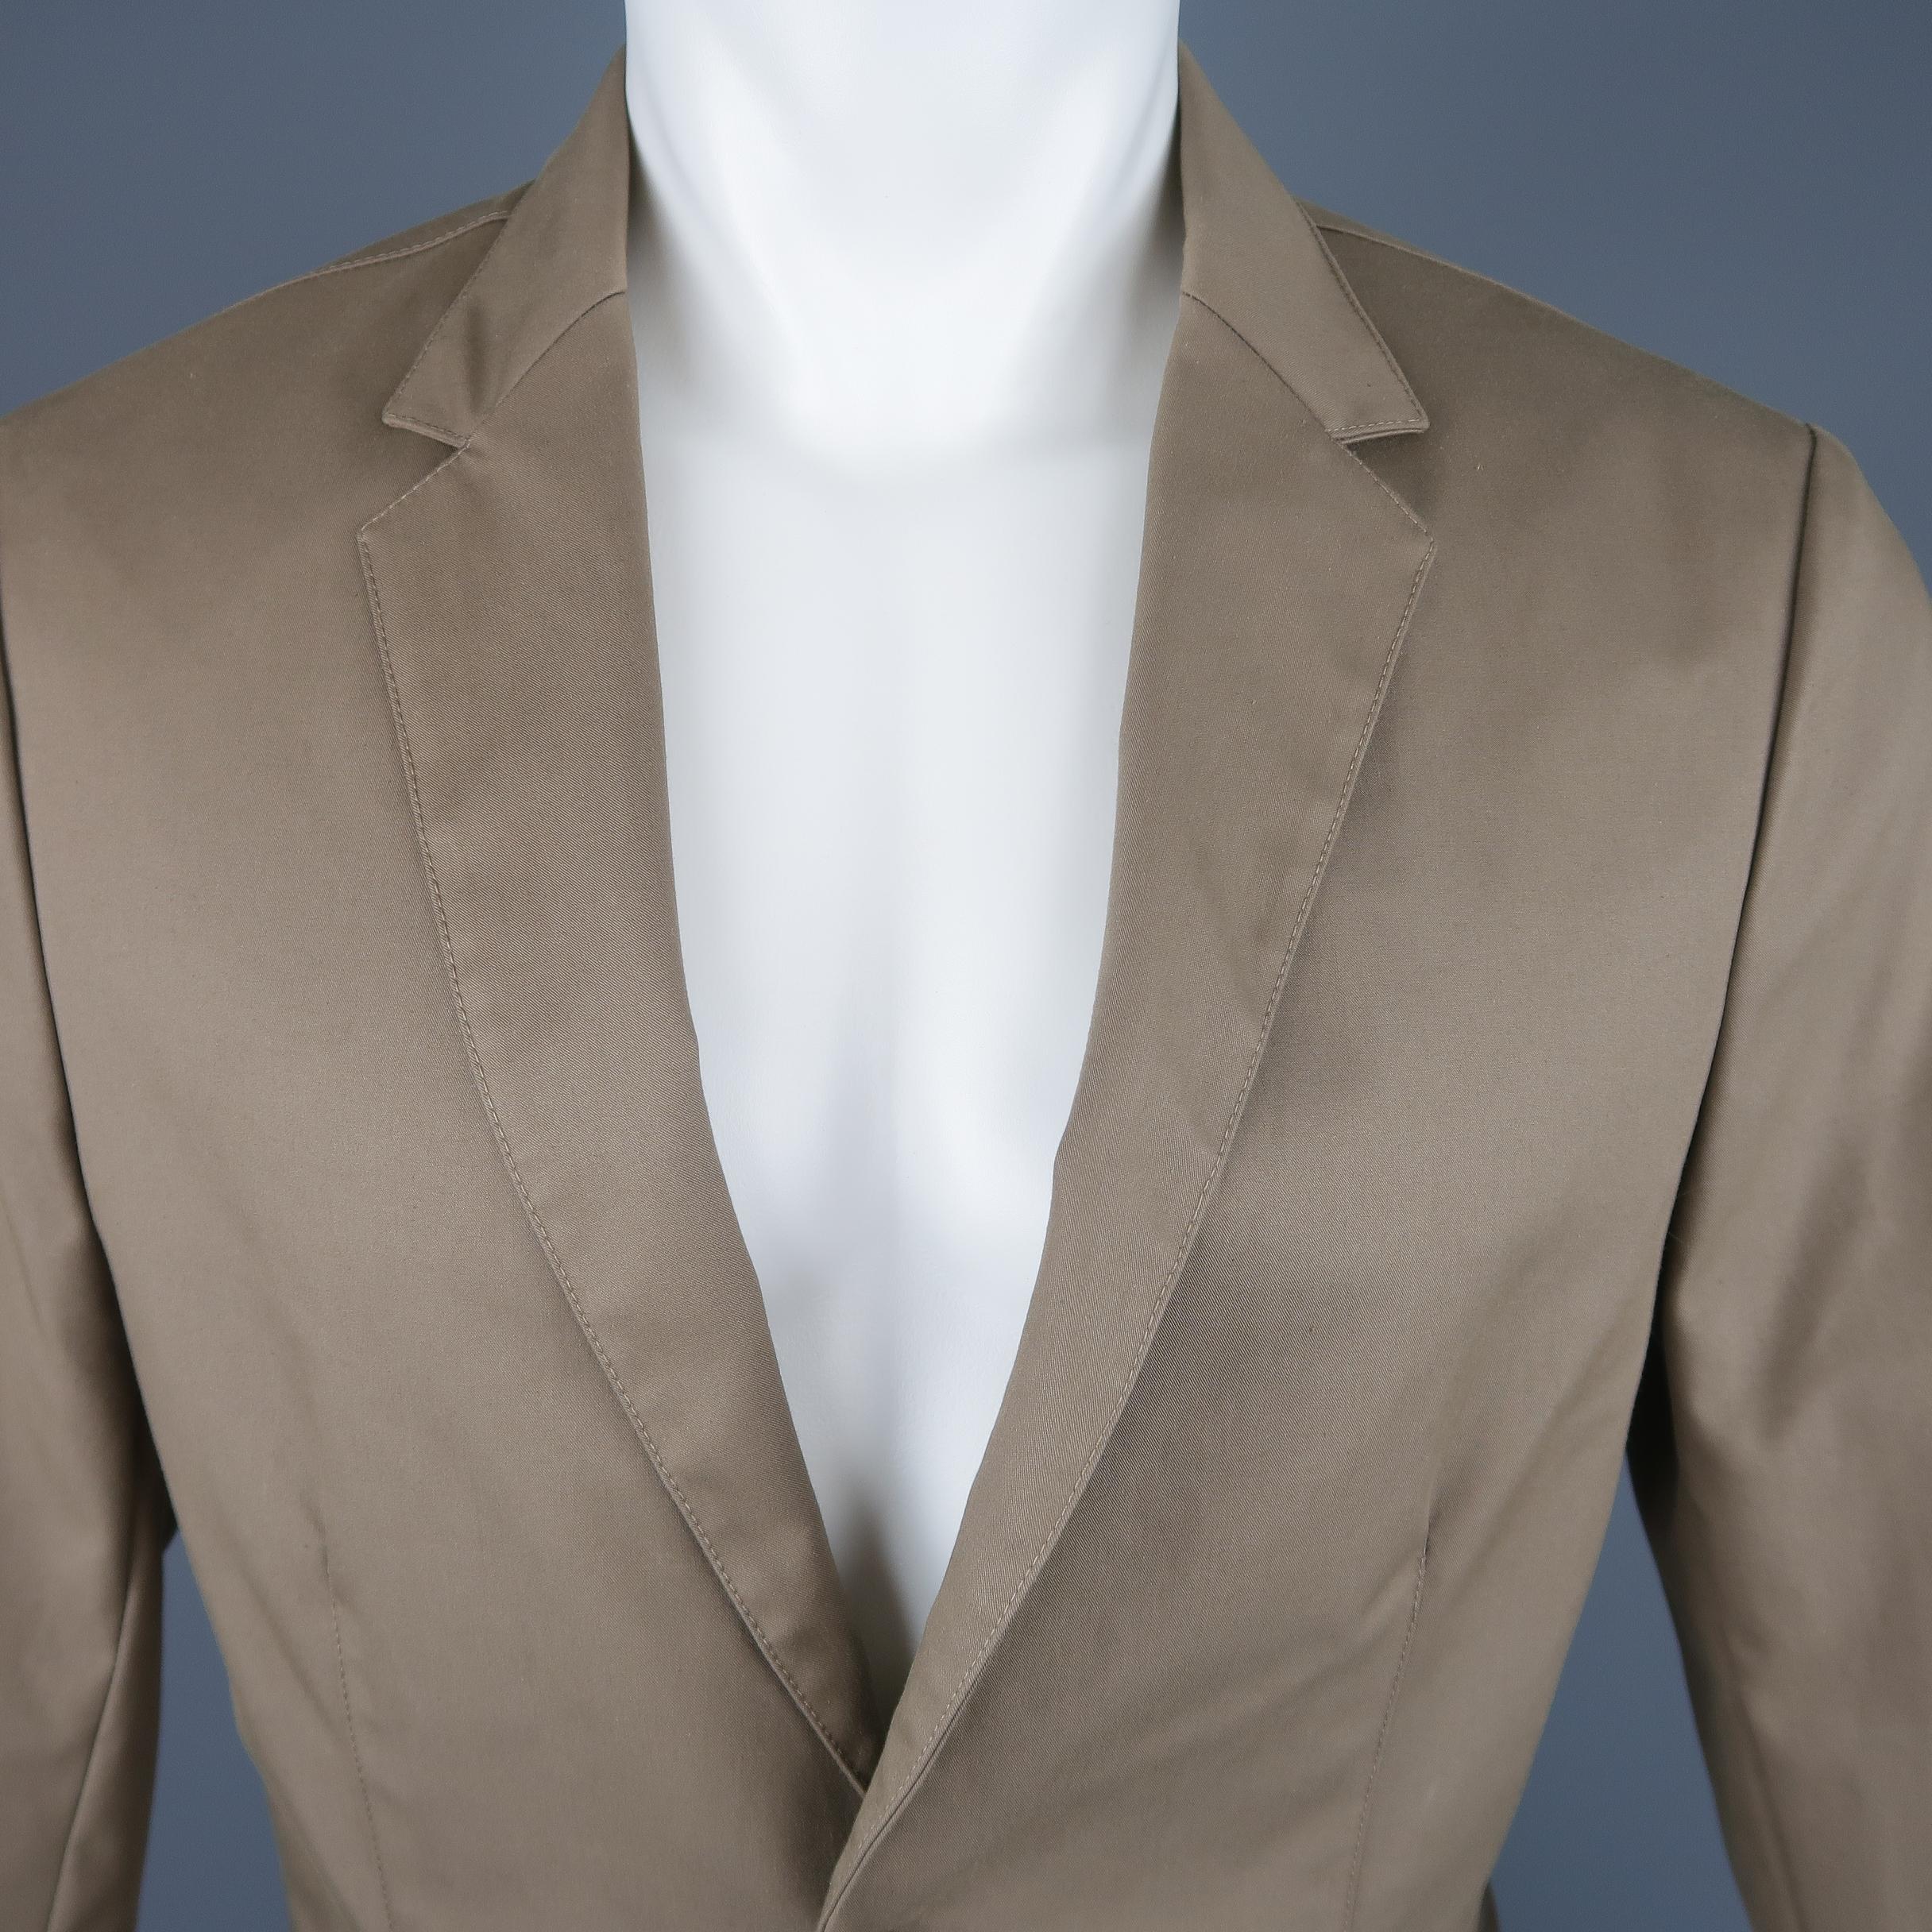 Single breasted CALVIN KLEIN COLLECTION monochromatic sport coat jacket comes in taupe cotton blend structured fabric with a notch lapel, two button front, and ventless back. Made in Italy.
 
New with tags
Marked: IT 48
 
Measurements:
 
Shoulder: